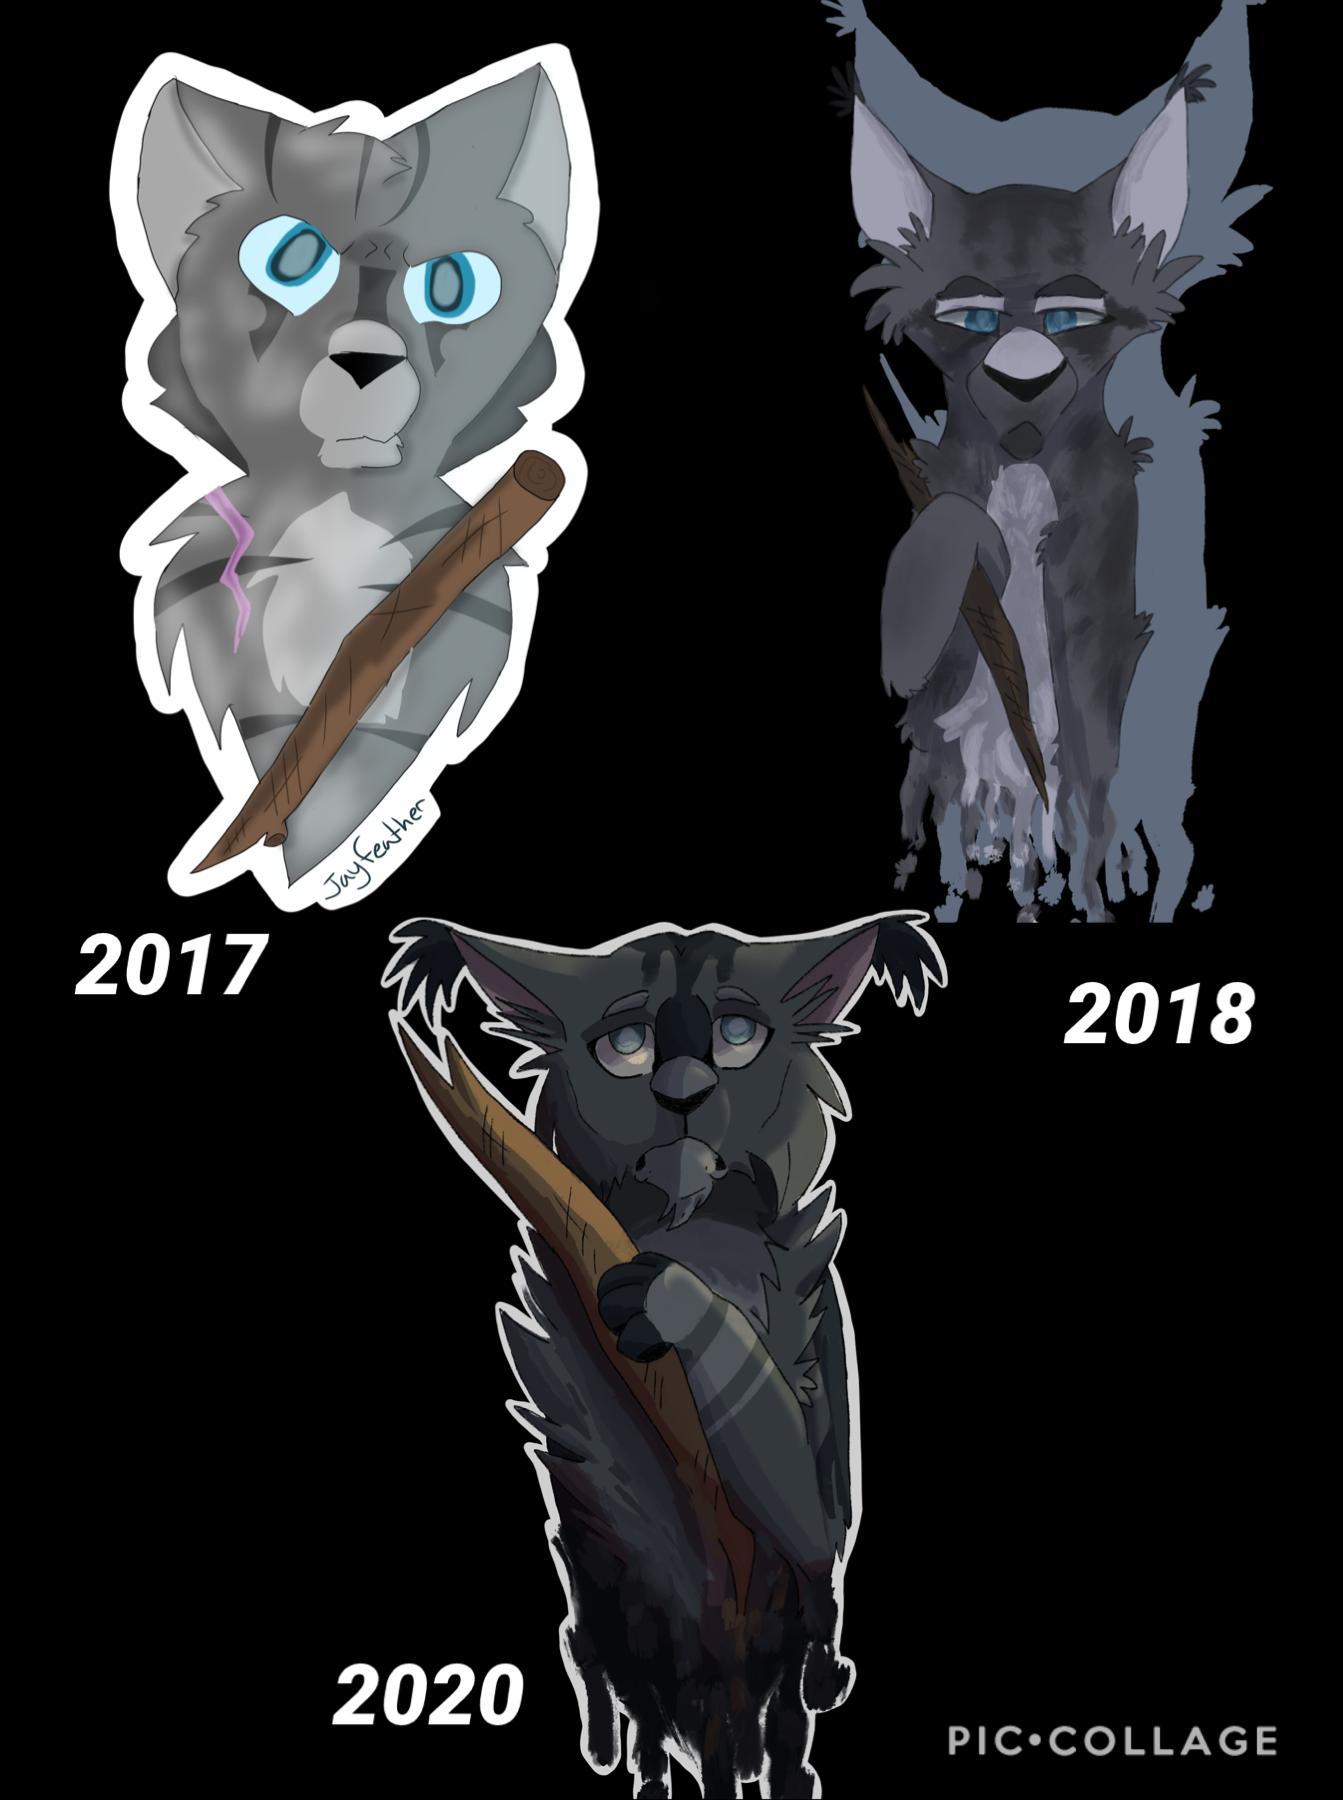 I made a sticker back in 2017 and then redrew it just to see the improvement, it’s good to know that my style and character design skills have changed and it’s really cool to look back at old art!